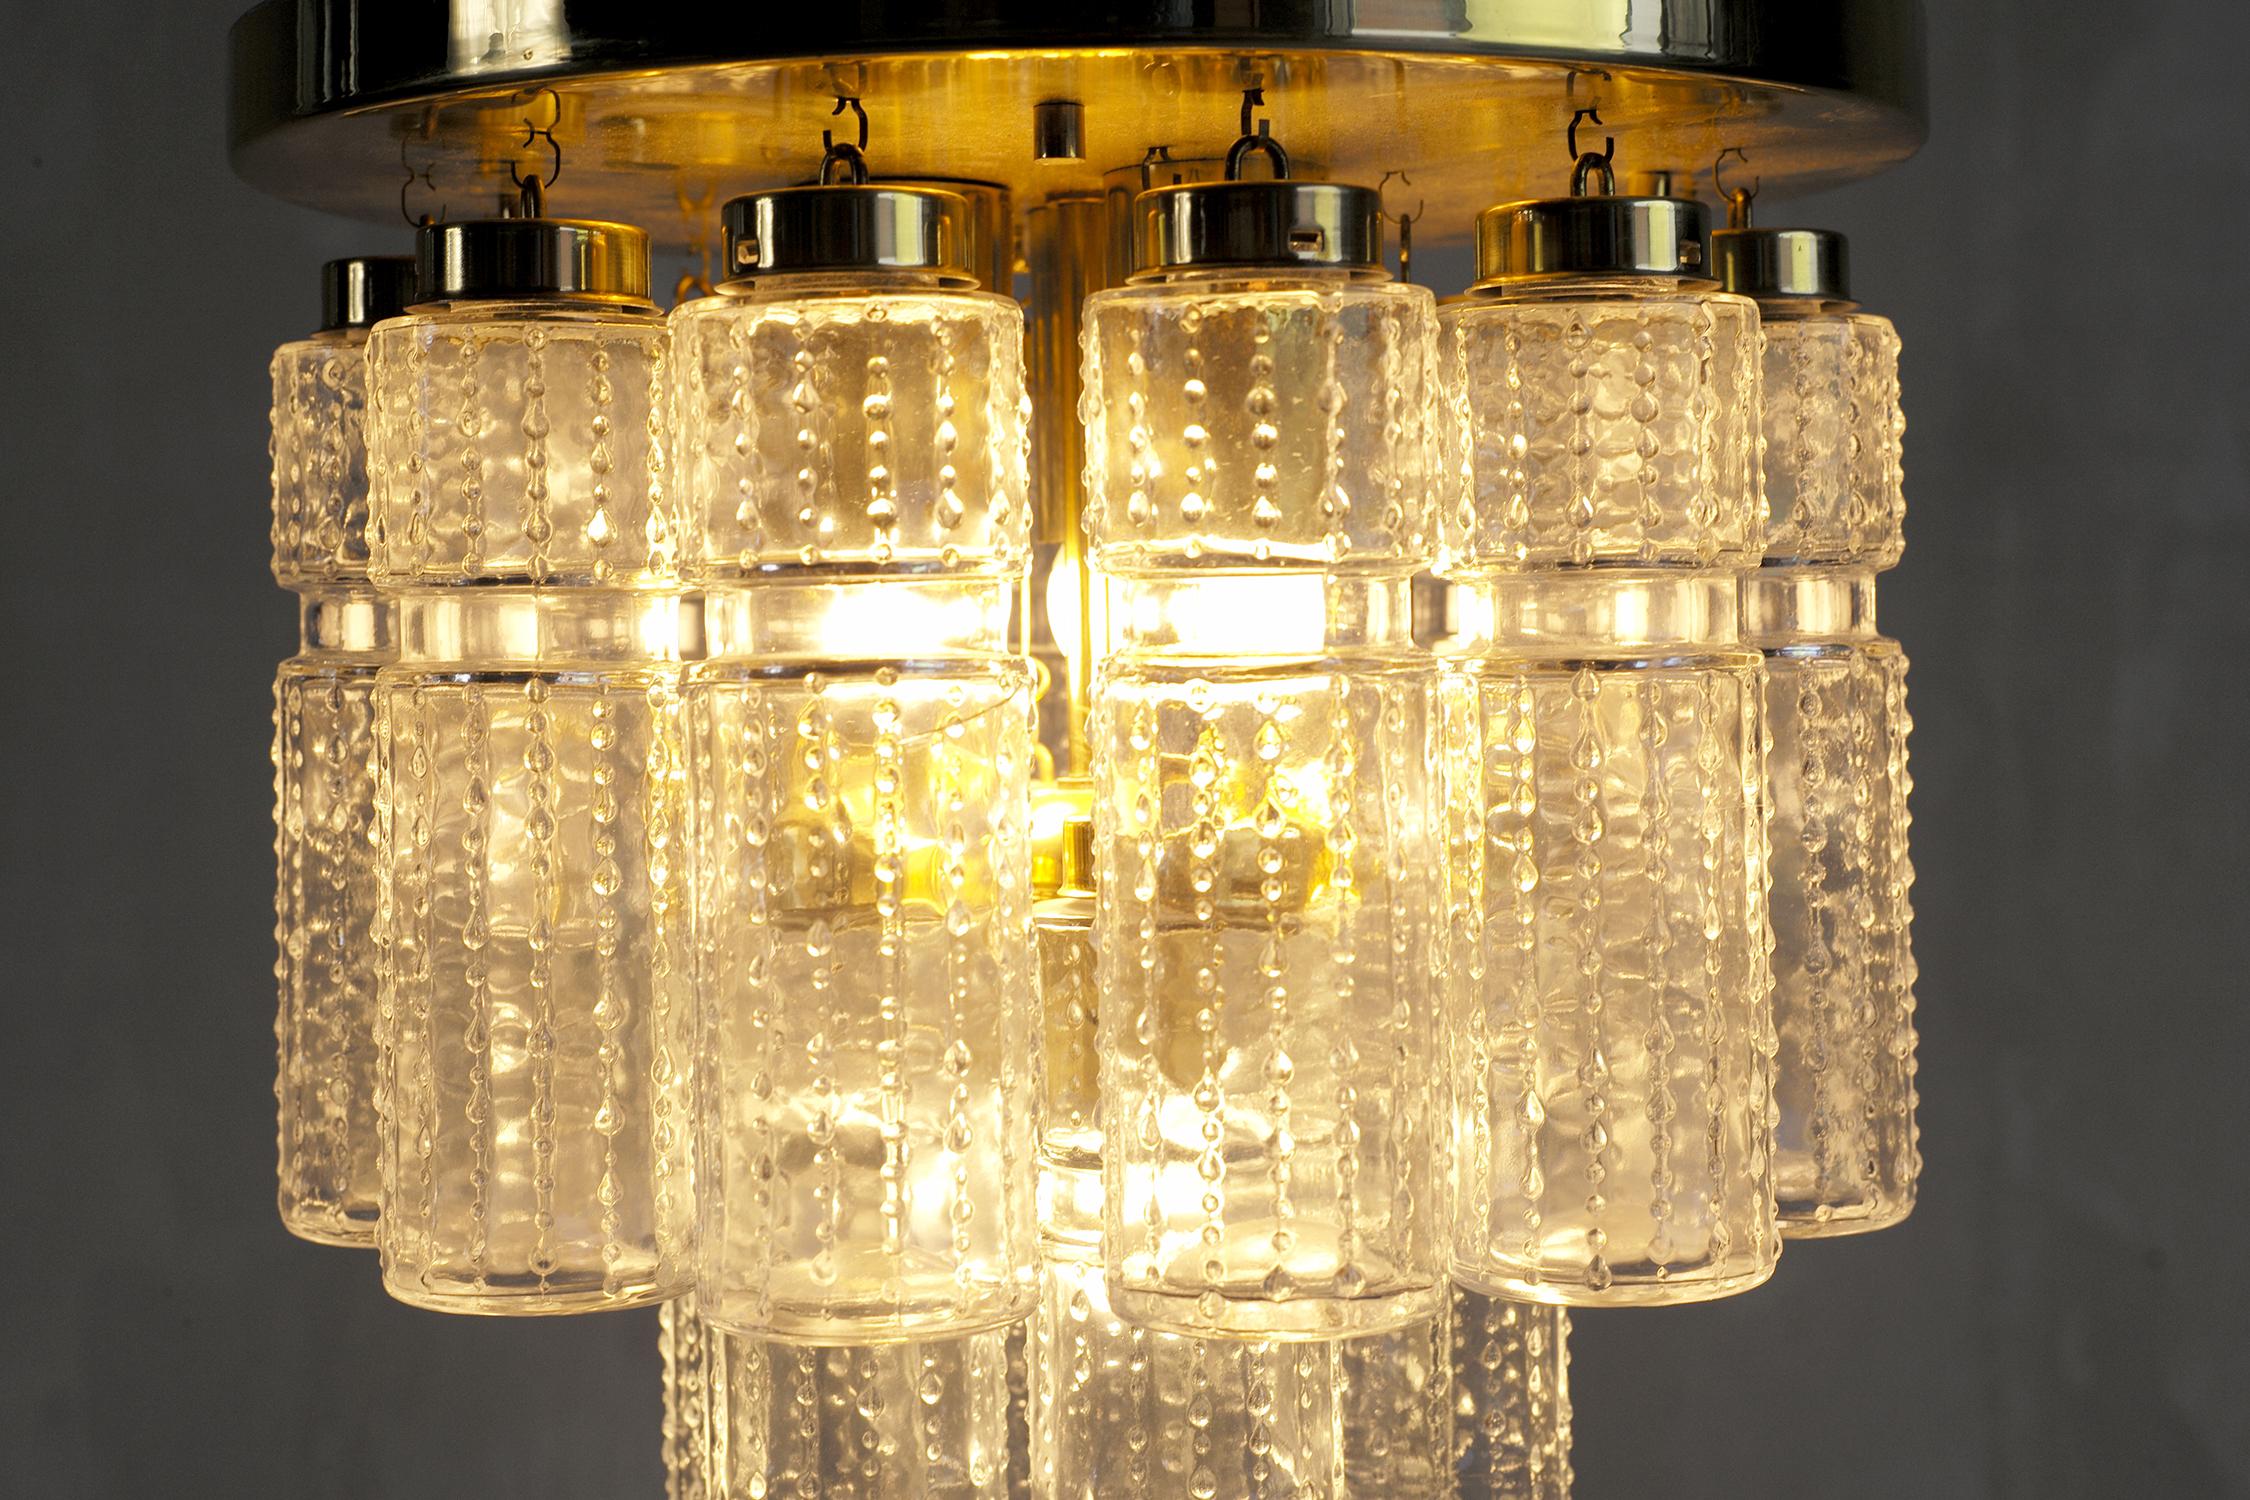 Set of 3 ceiling lights in gilded brass and glass produced by Maison Limburg, Germany 1960. A ceiling light has 4 lights and 18 glass cylinders in 2 rows, the other two have a light and 6 glass cylinders. Ideal for a hallway, stairway or bedroom,